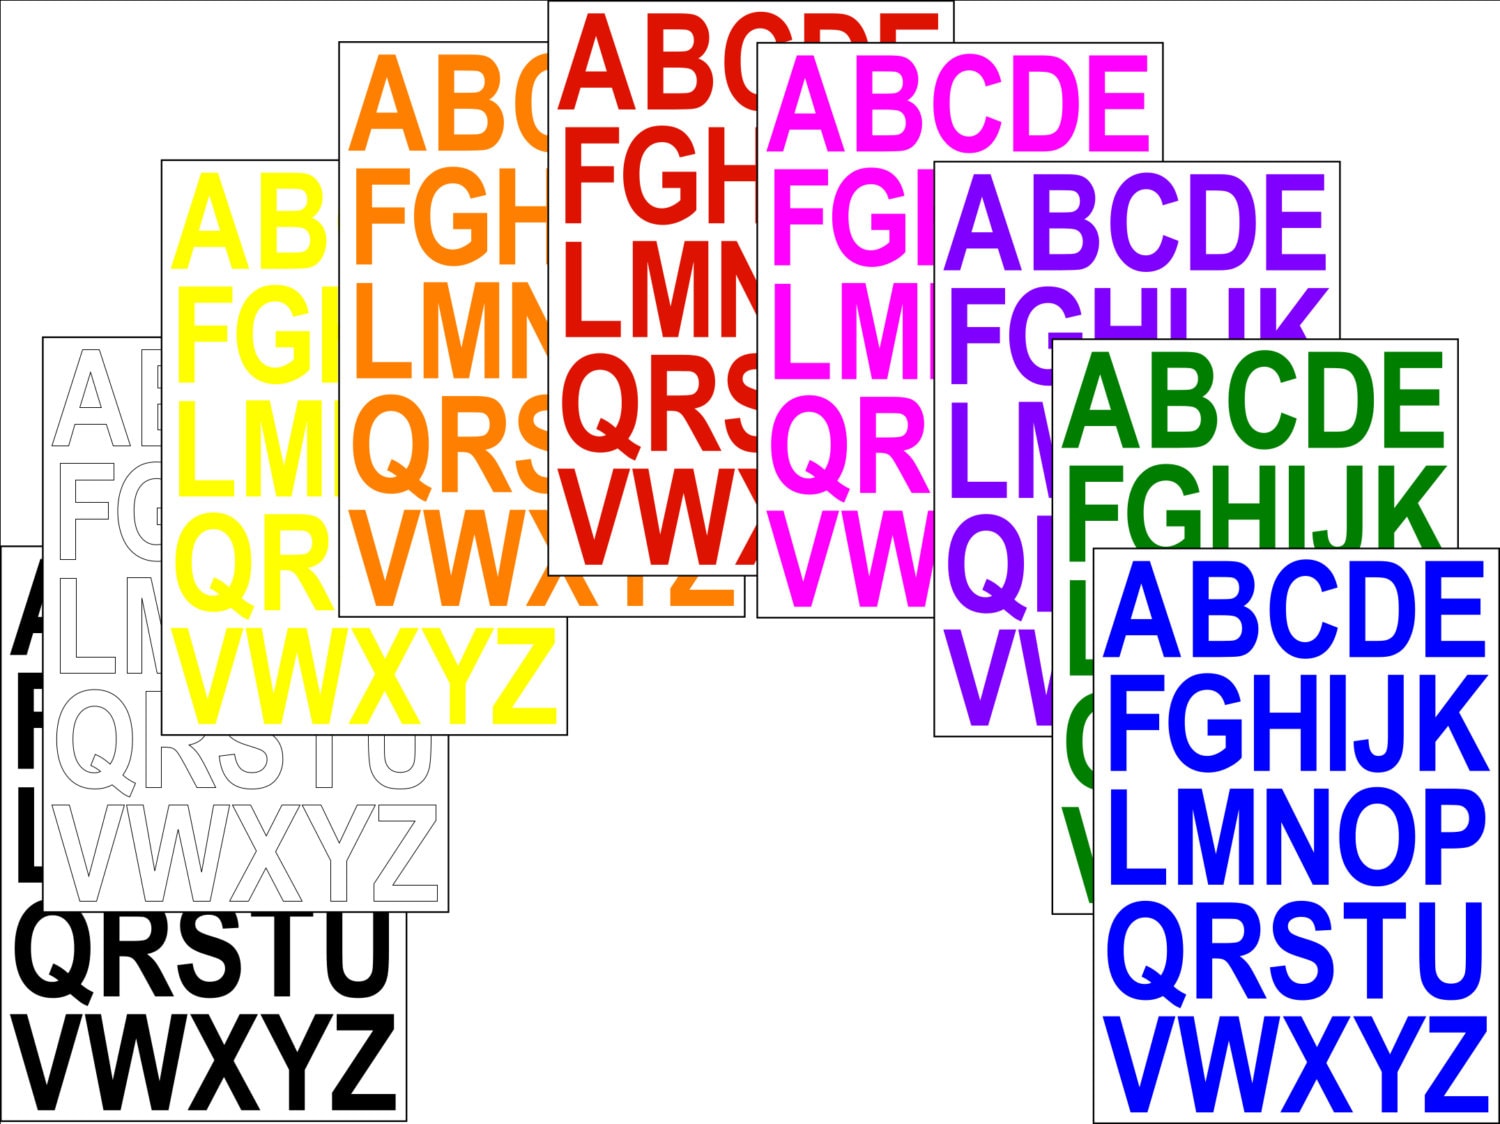 A4 SHEET OF ALPHABET LETTERS & NUMBERS VINYL STICKERS ANY COLOUR 